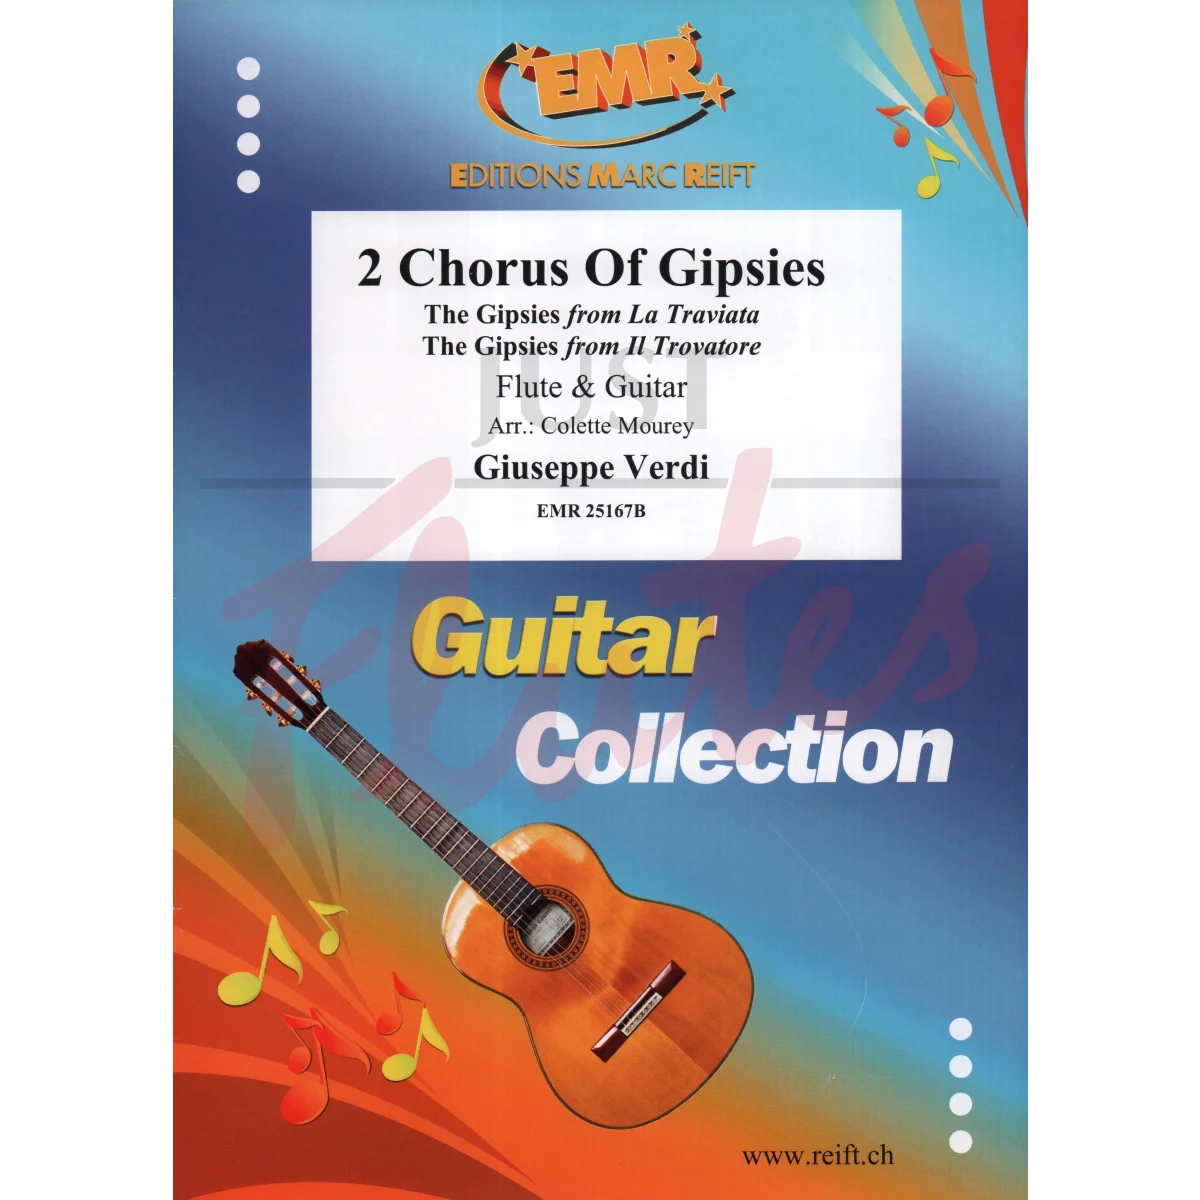 2 Chorus Of Gipsies for Flute and Guitar